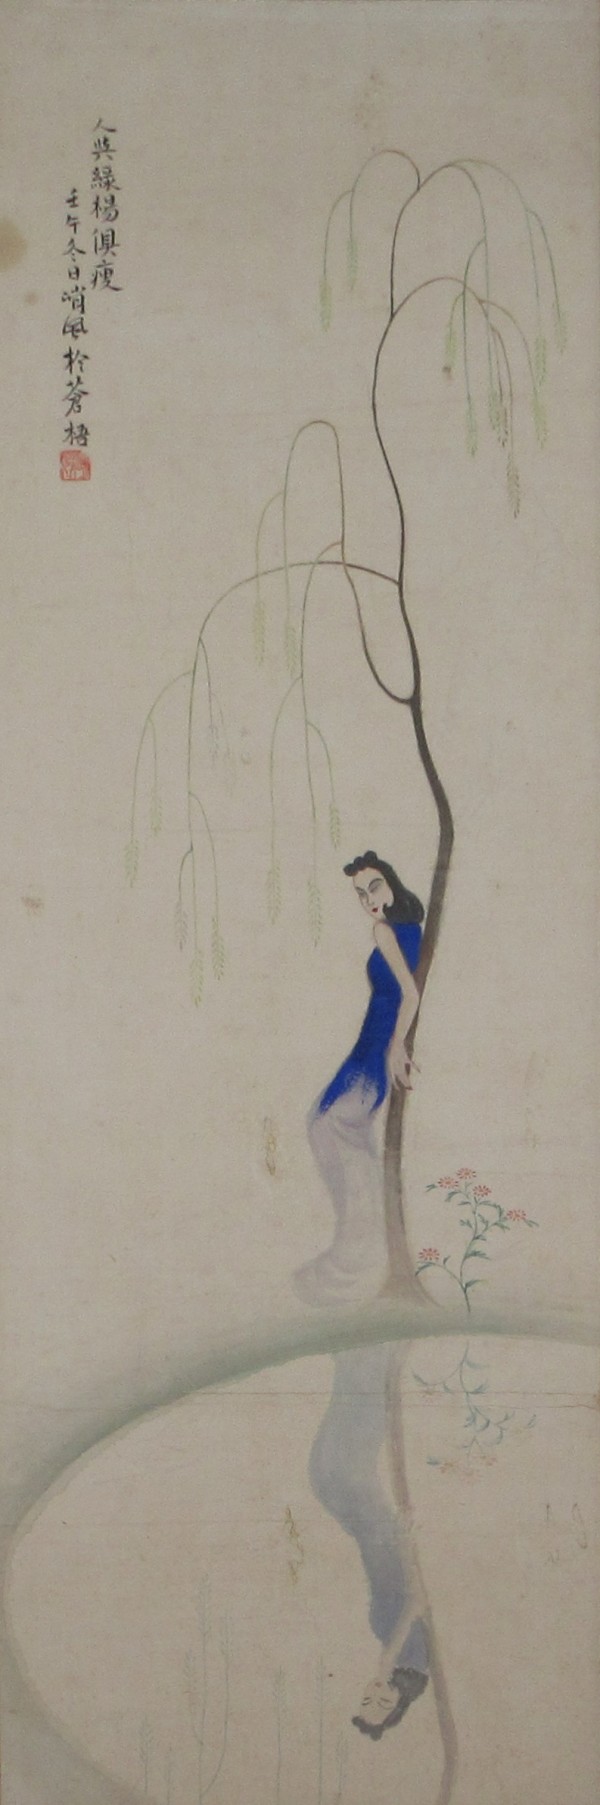 Woman Leaning On Willow Tree by Chiu Fung Poon